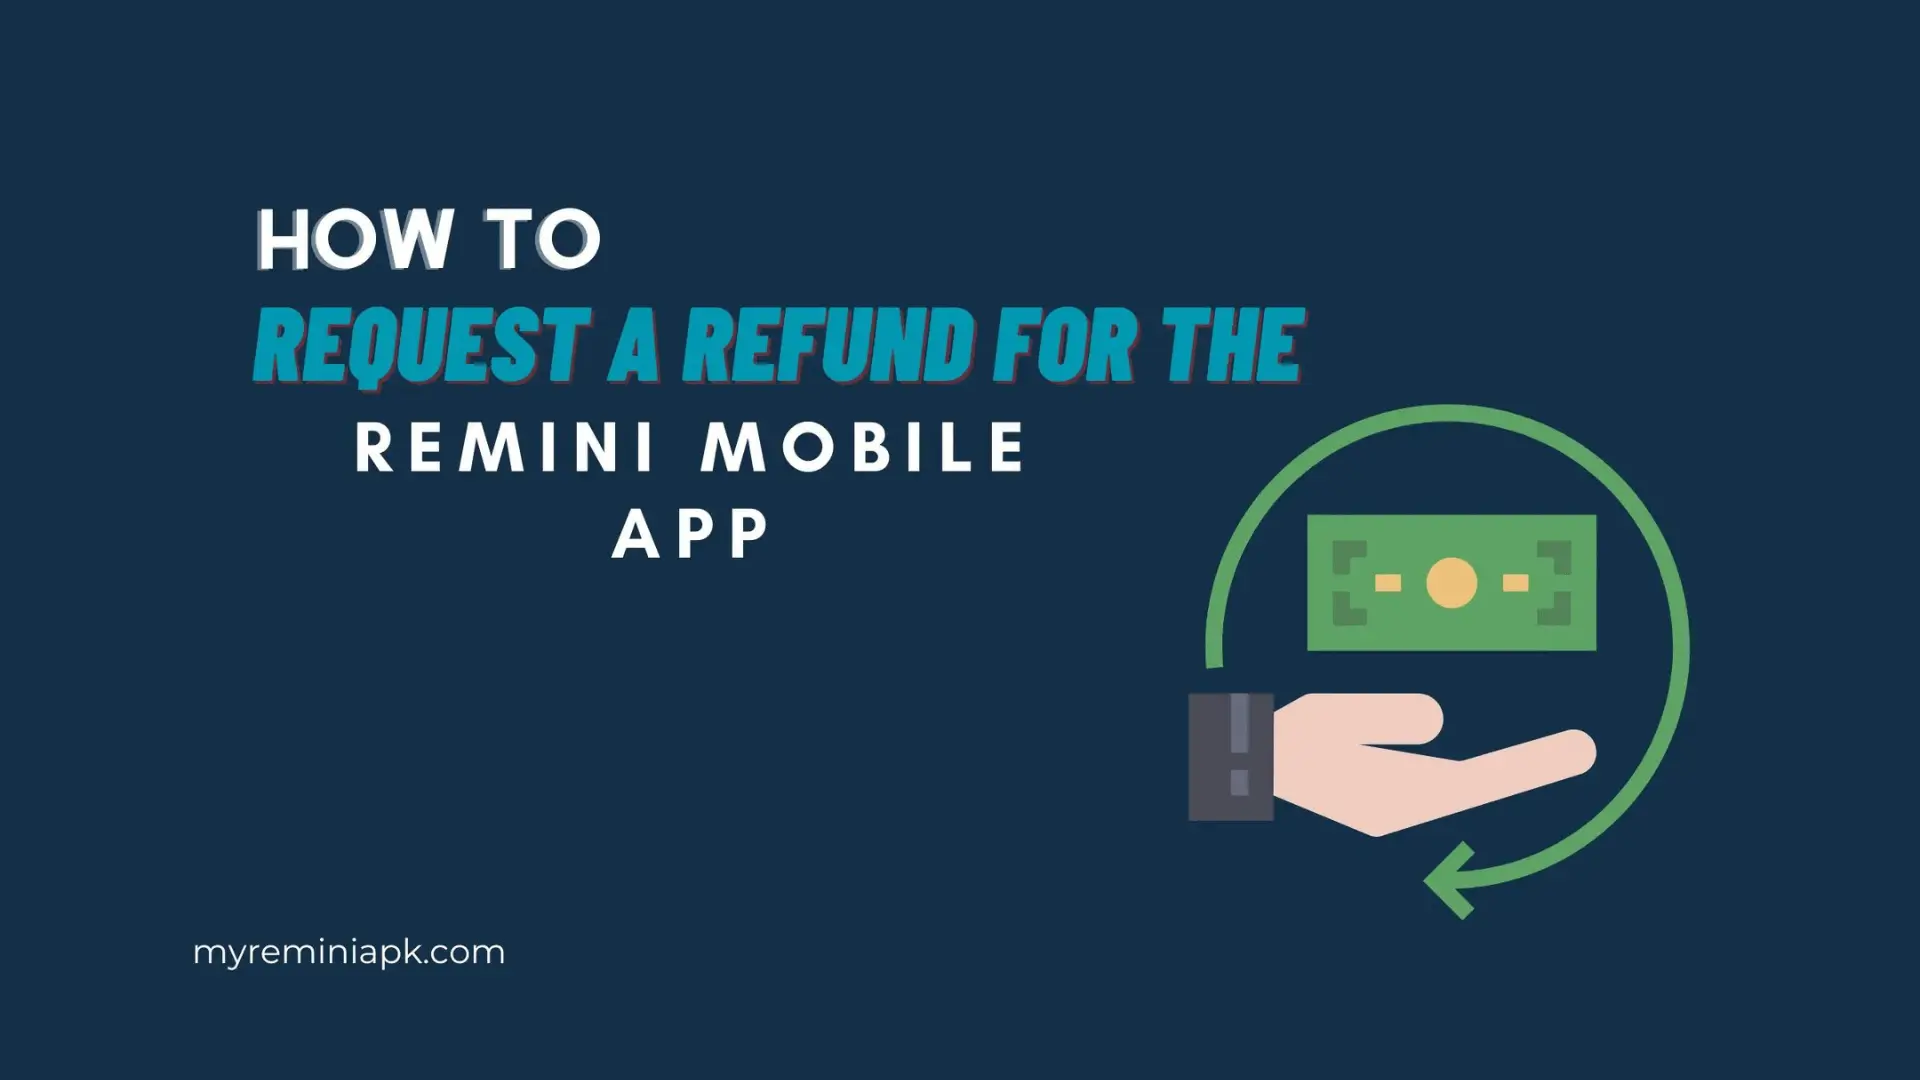 How to request a refund for the Remini Mobile App?